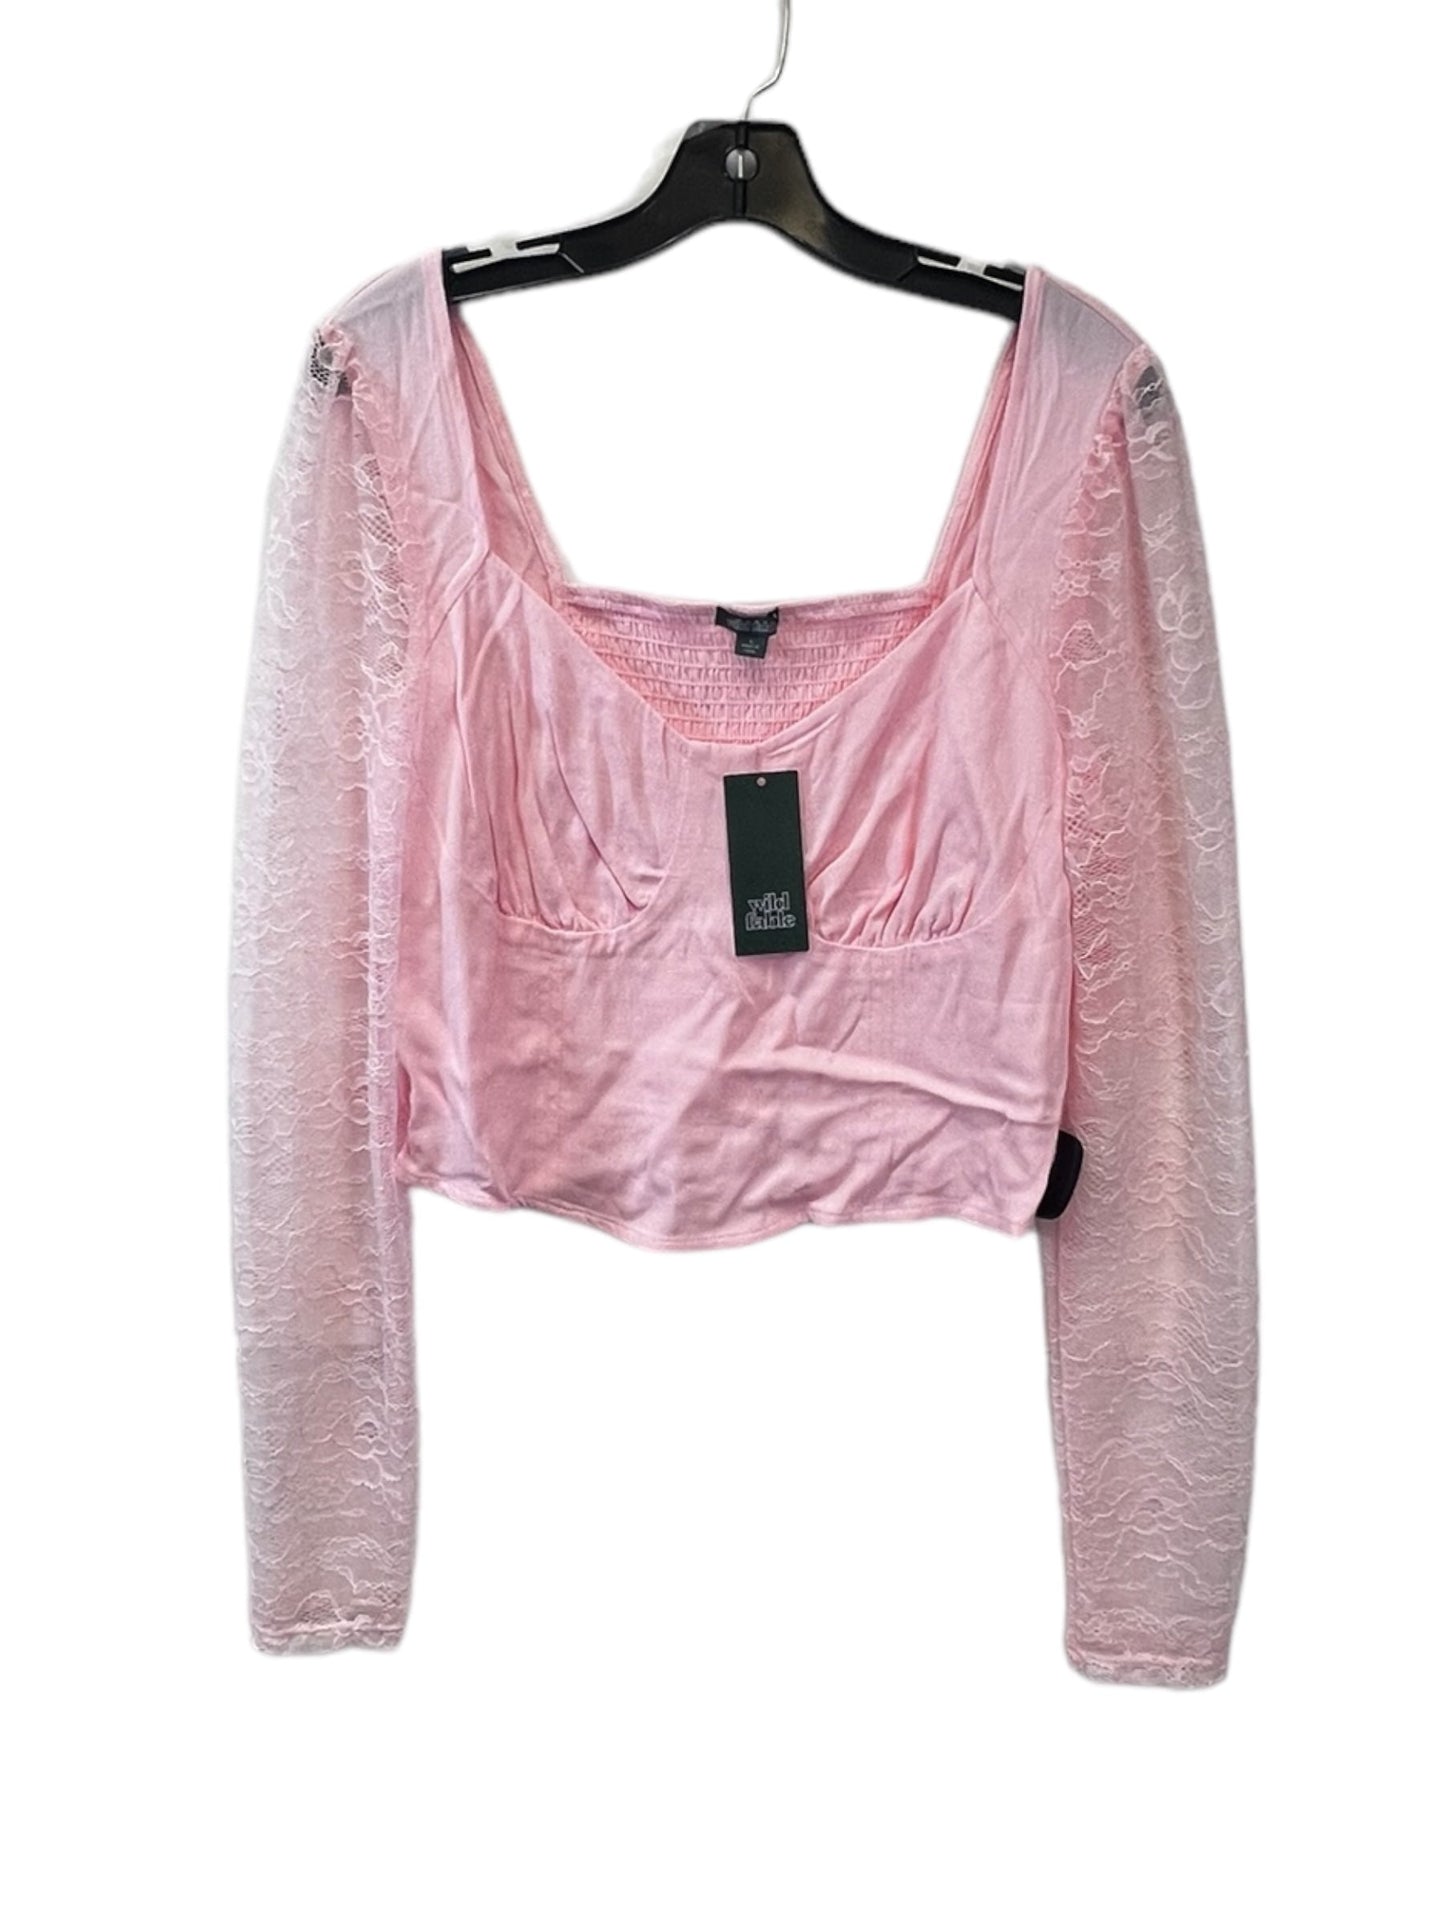 Pink Top Long Sleeve Wild Fable, Size S